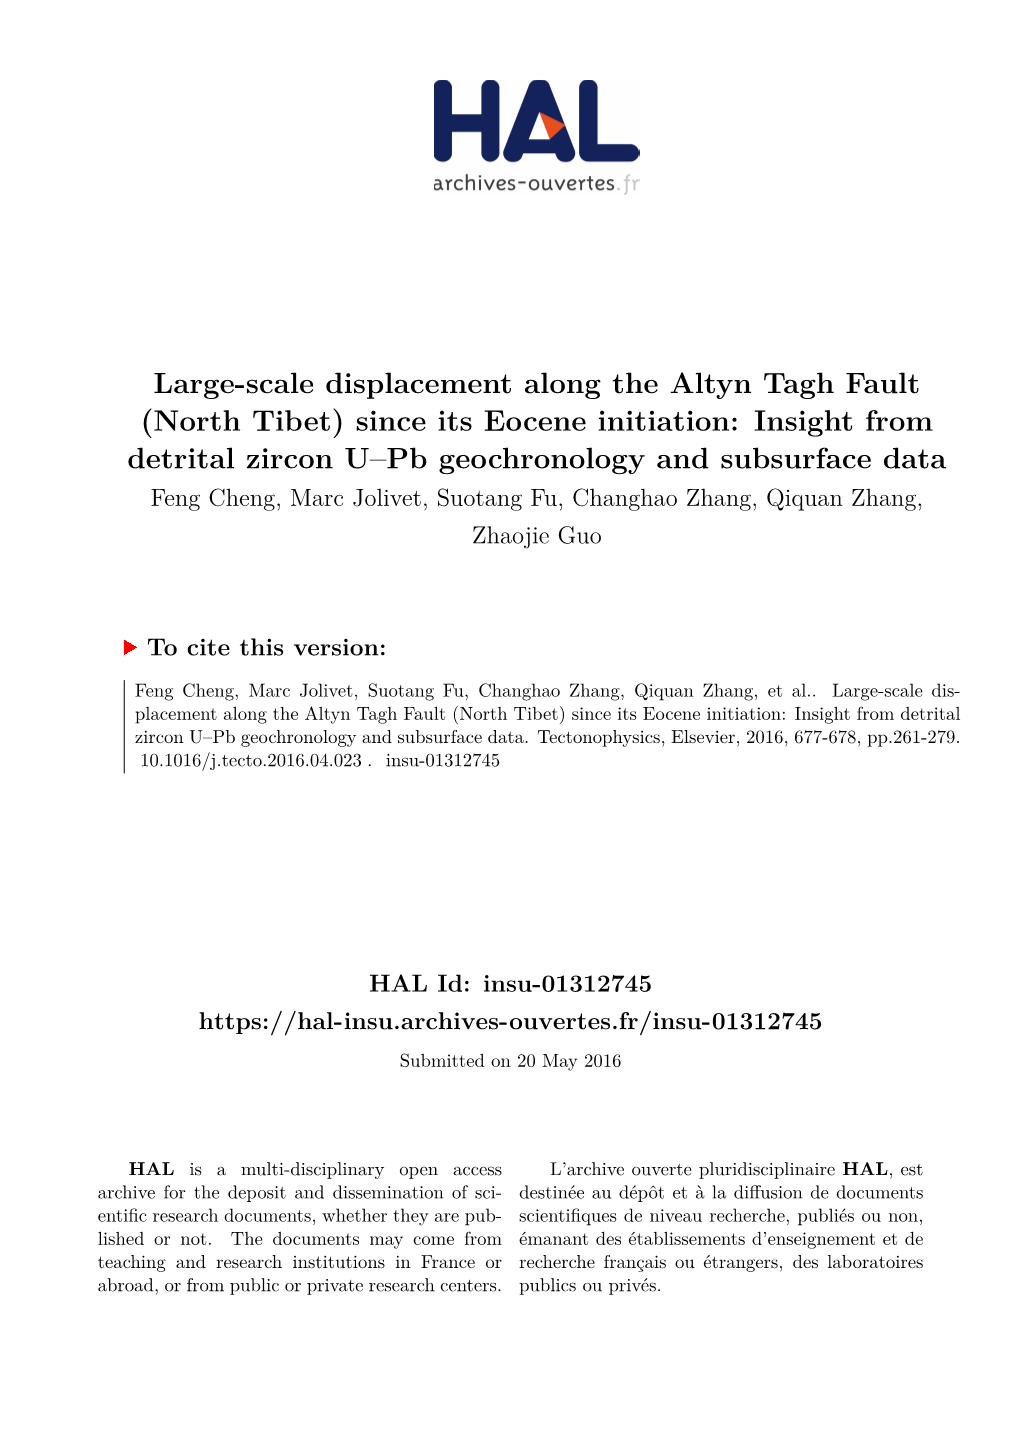 Large-Scale Displacement Along the Altyn Tagh Fault (North Tibet) Since